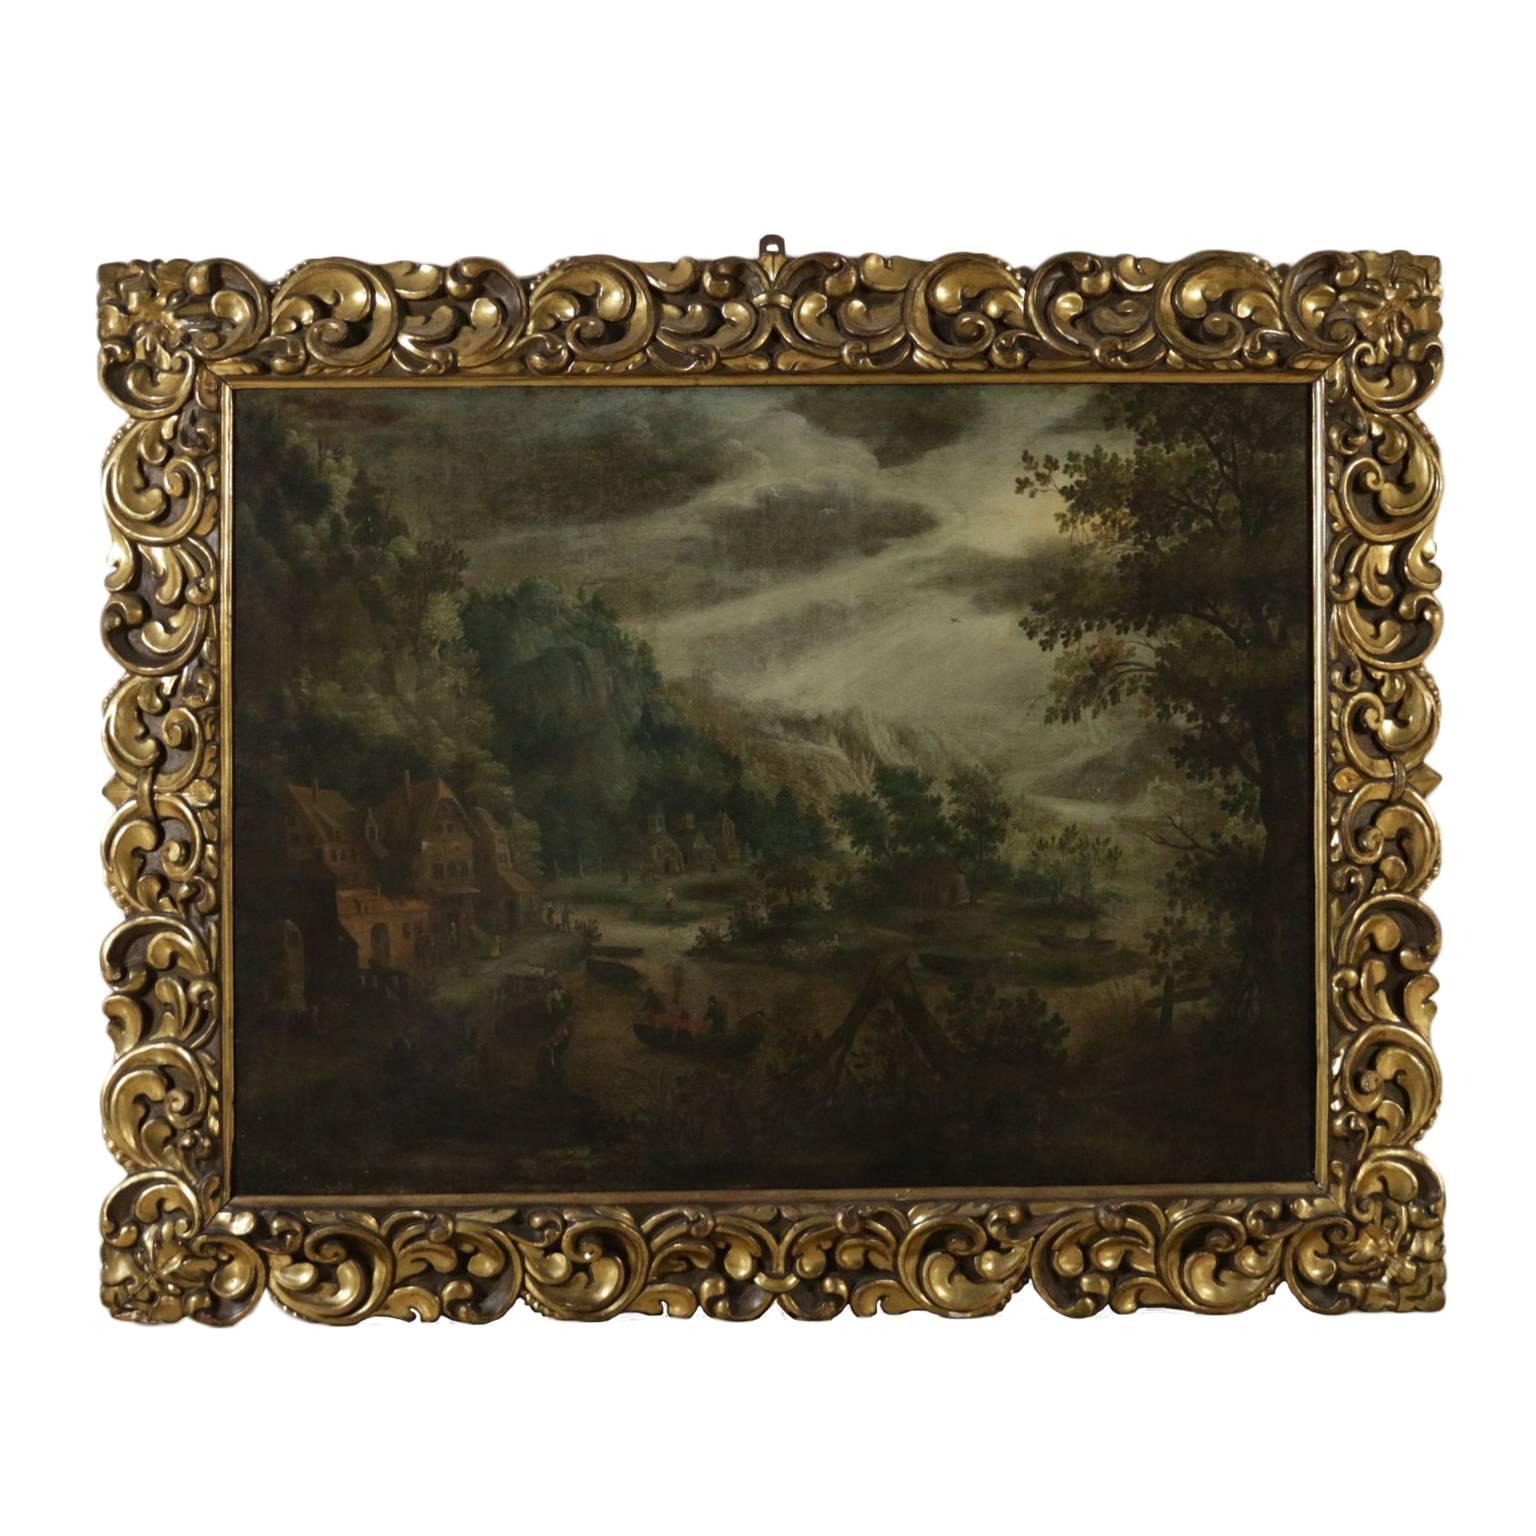 Unknown Landscape Painting - Flemish Painting Landscape with Figures Oil on Canvas 17th-18th Century